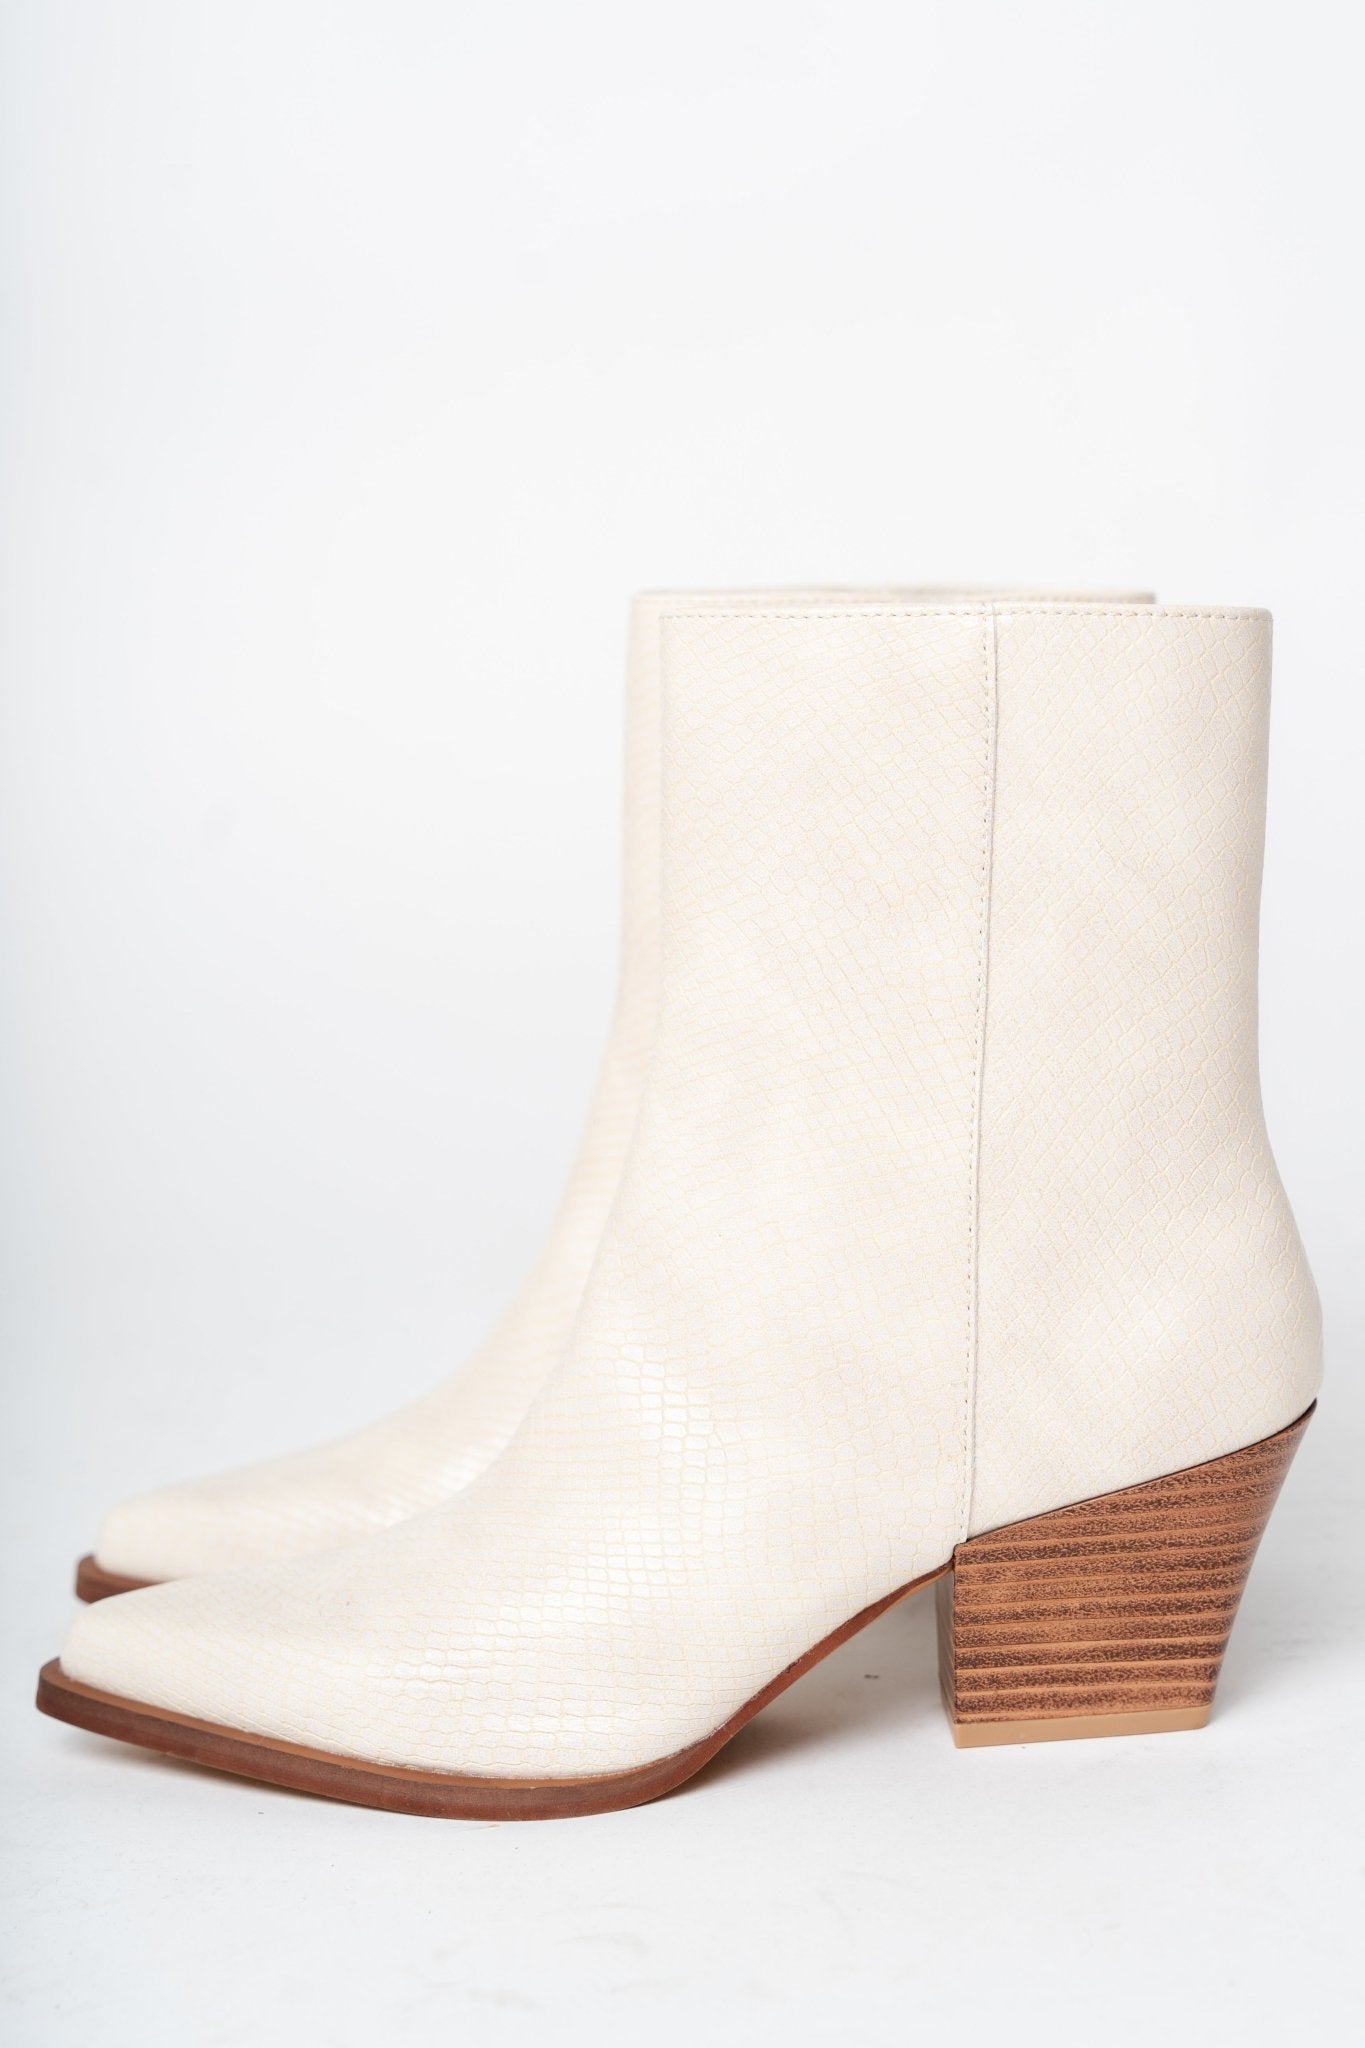 Miley alligator bootie beige - Affordable shoes - Boutique Shoes at Lush Fashion Lounge Boutique in Oklahoma City